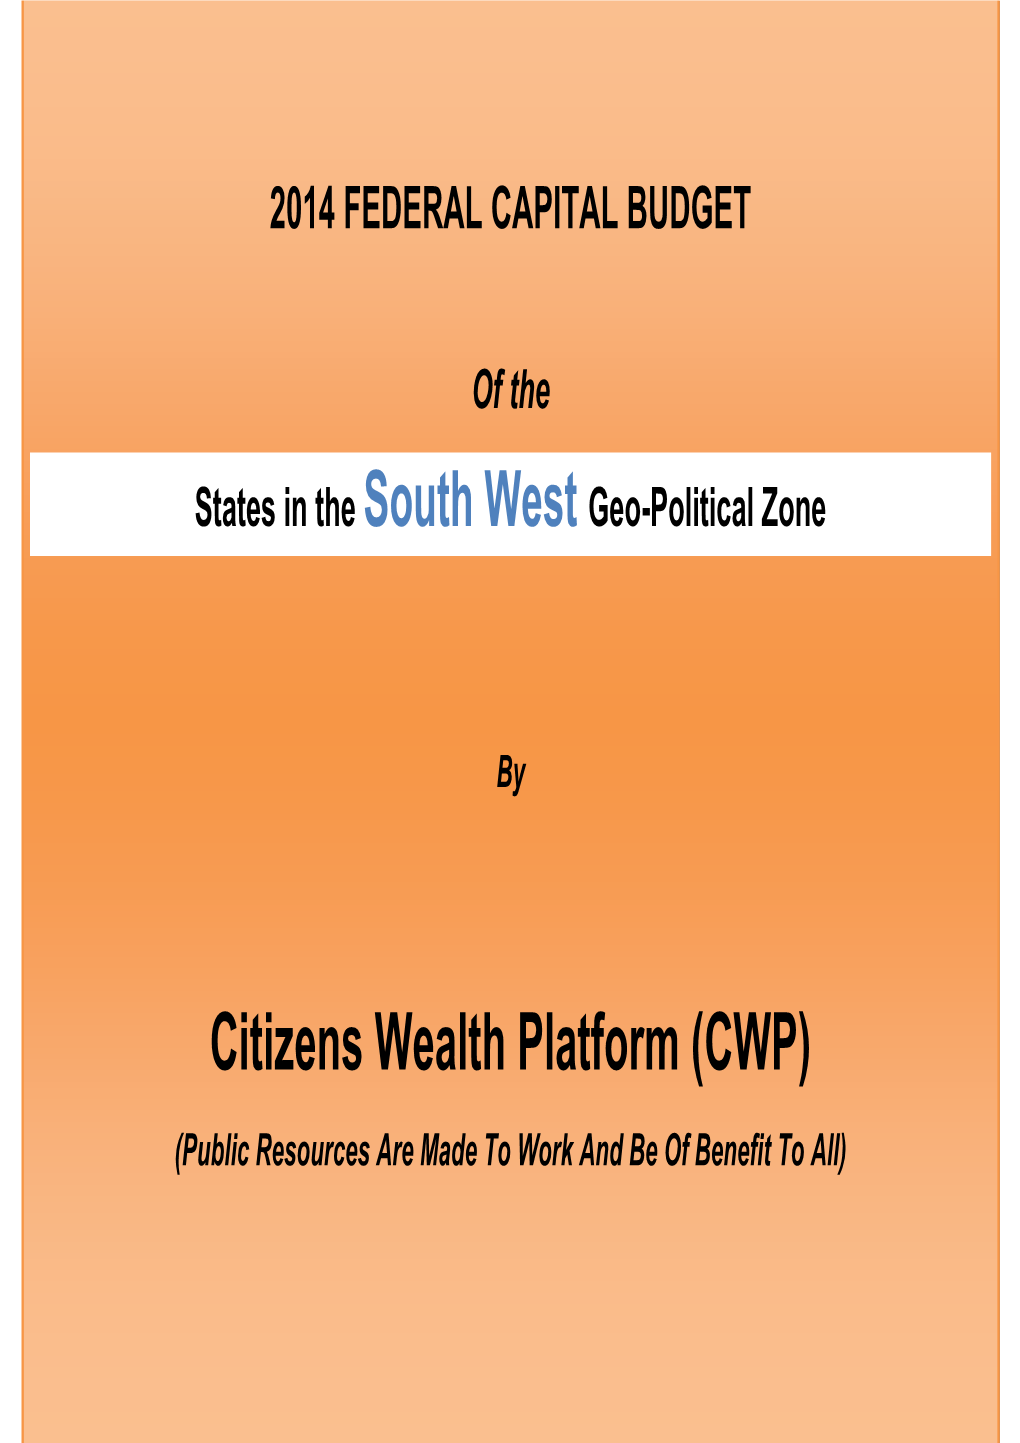 2014 South West Federal Capital Budget Pull